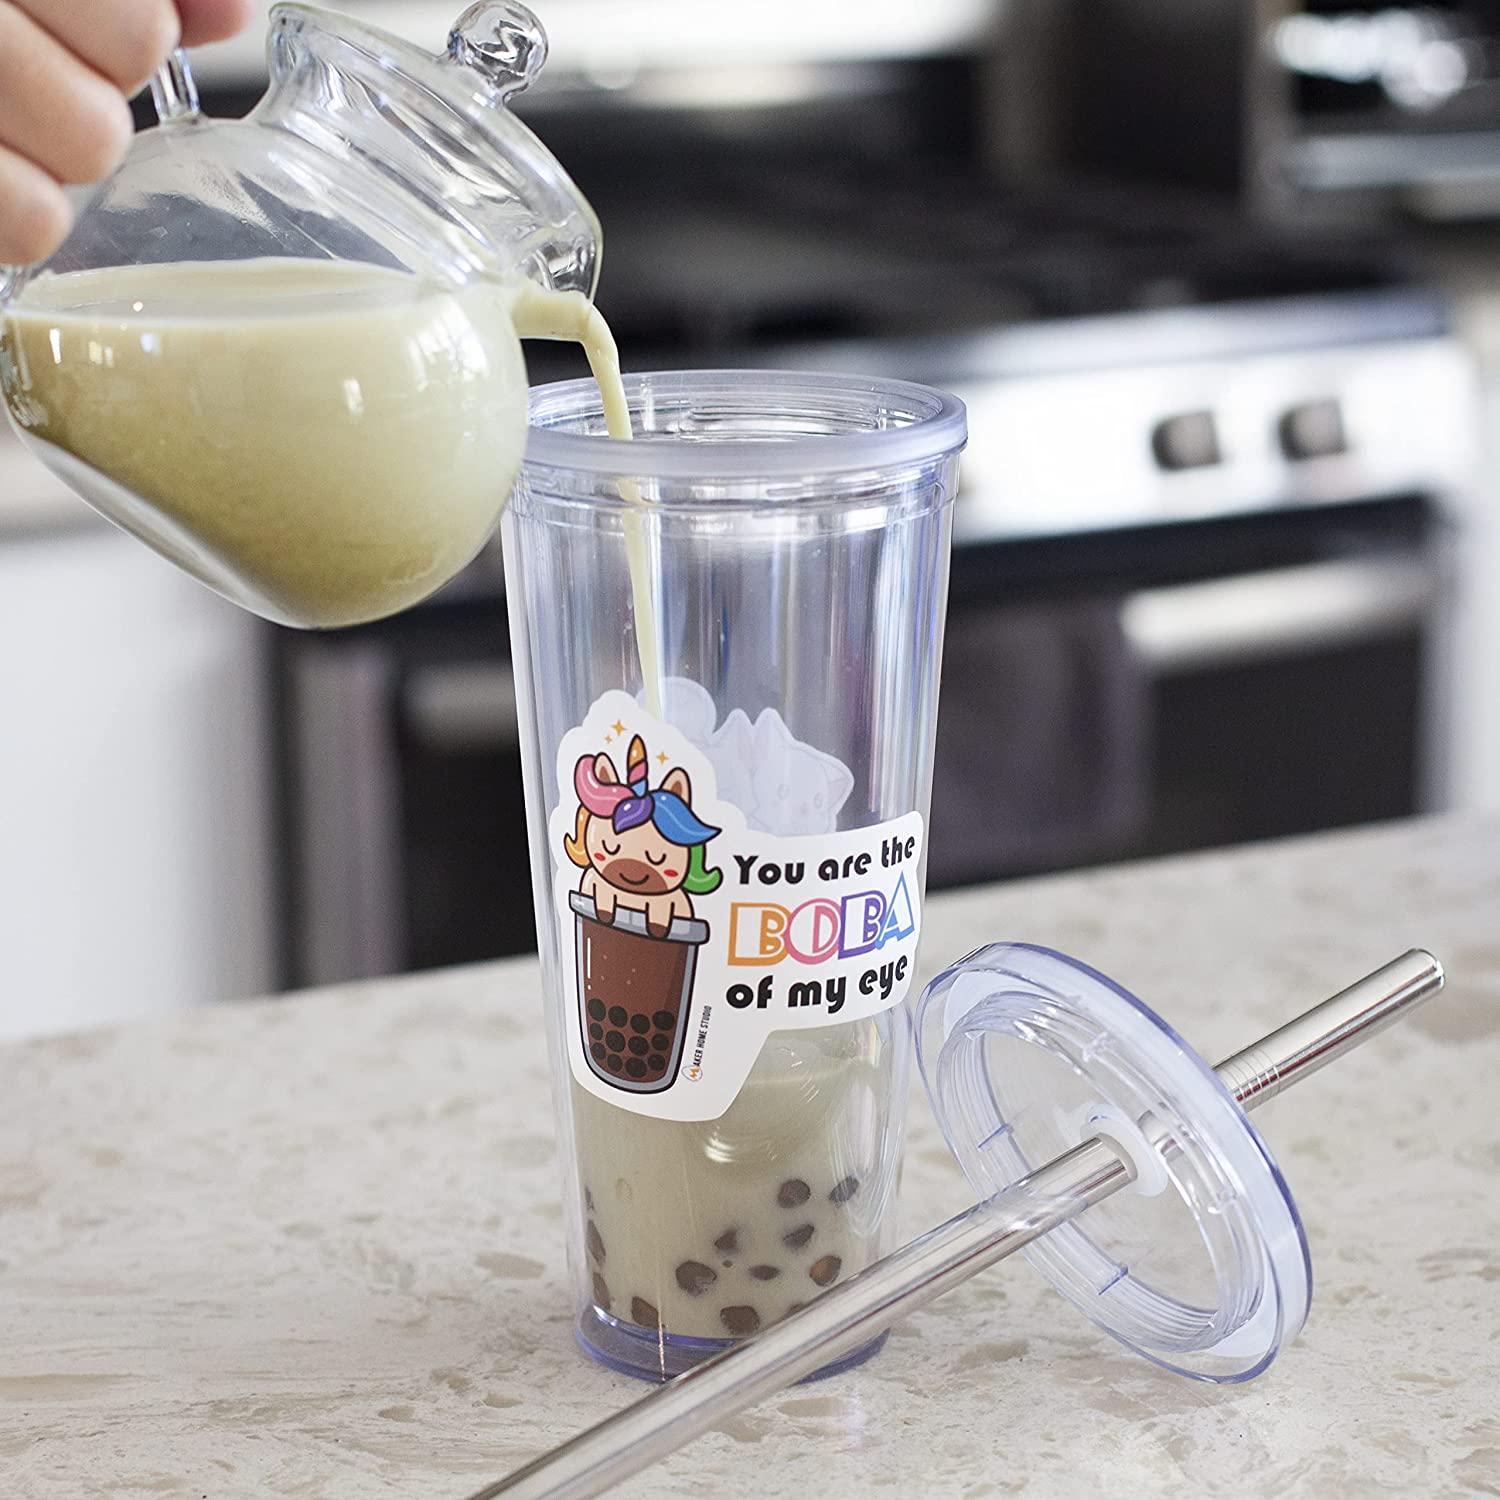 YUMBUCHA Reusable Boba Cup with Stainless Steel Boba Straw | Effortlessly Enjoy Boba Pearls | Complete Kit Including Boba Tea Cup & Reusable Boba